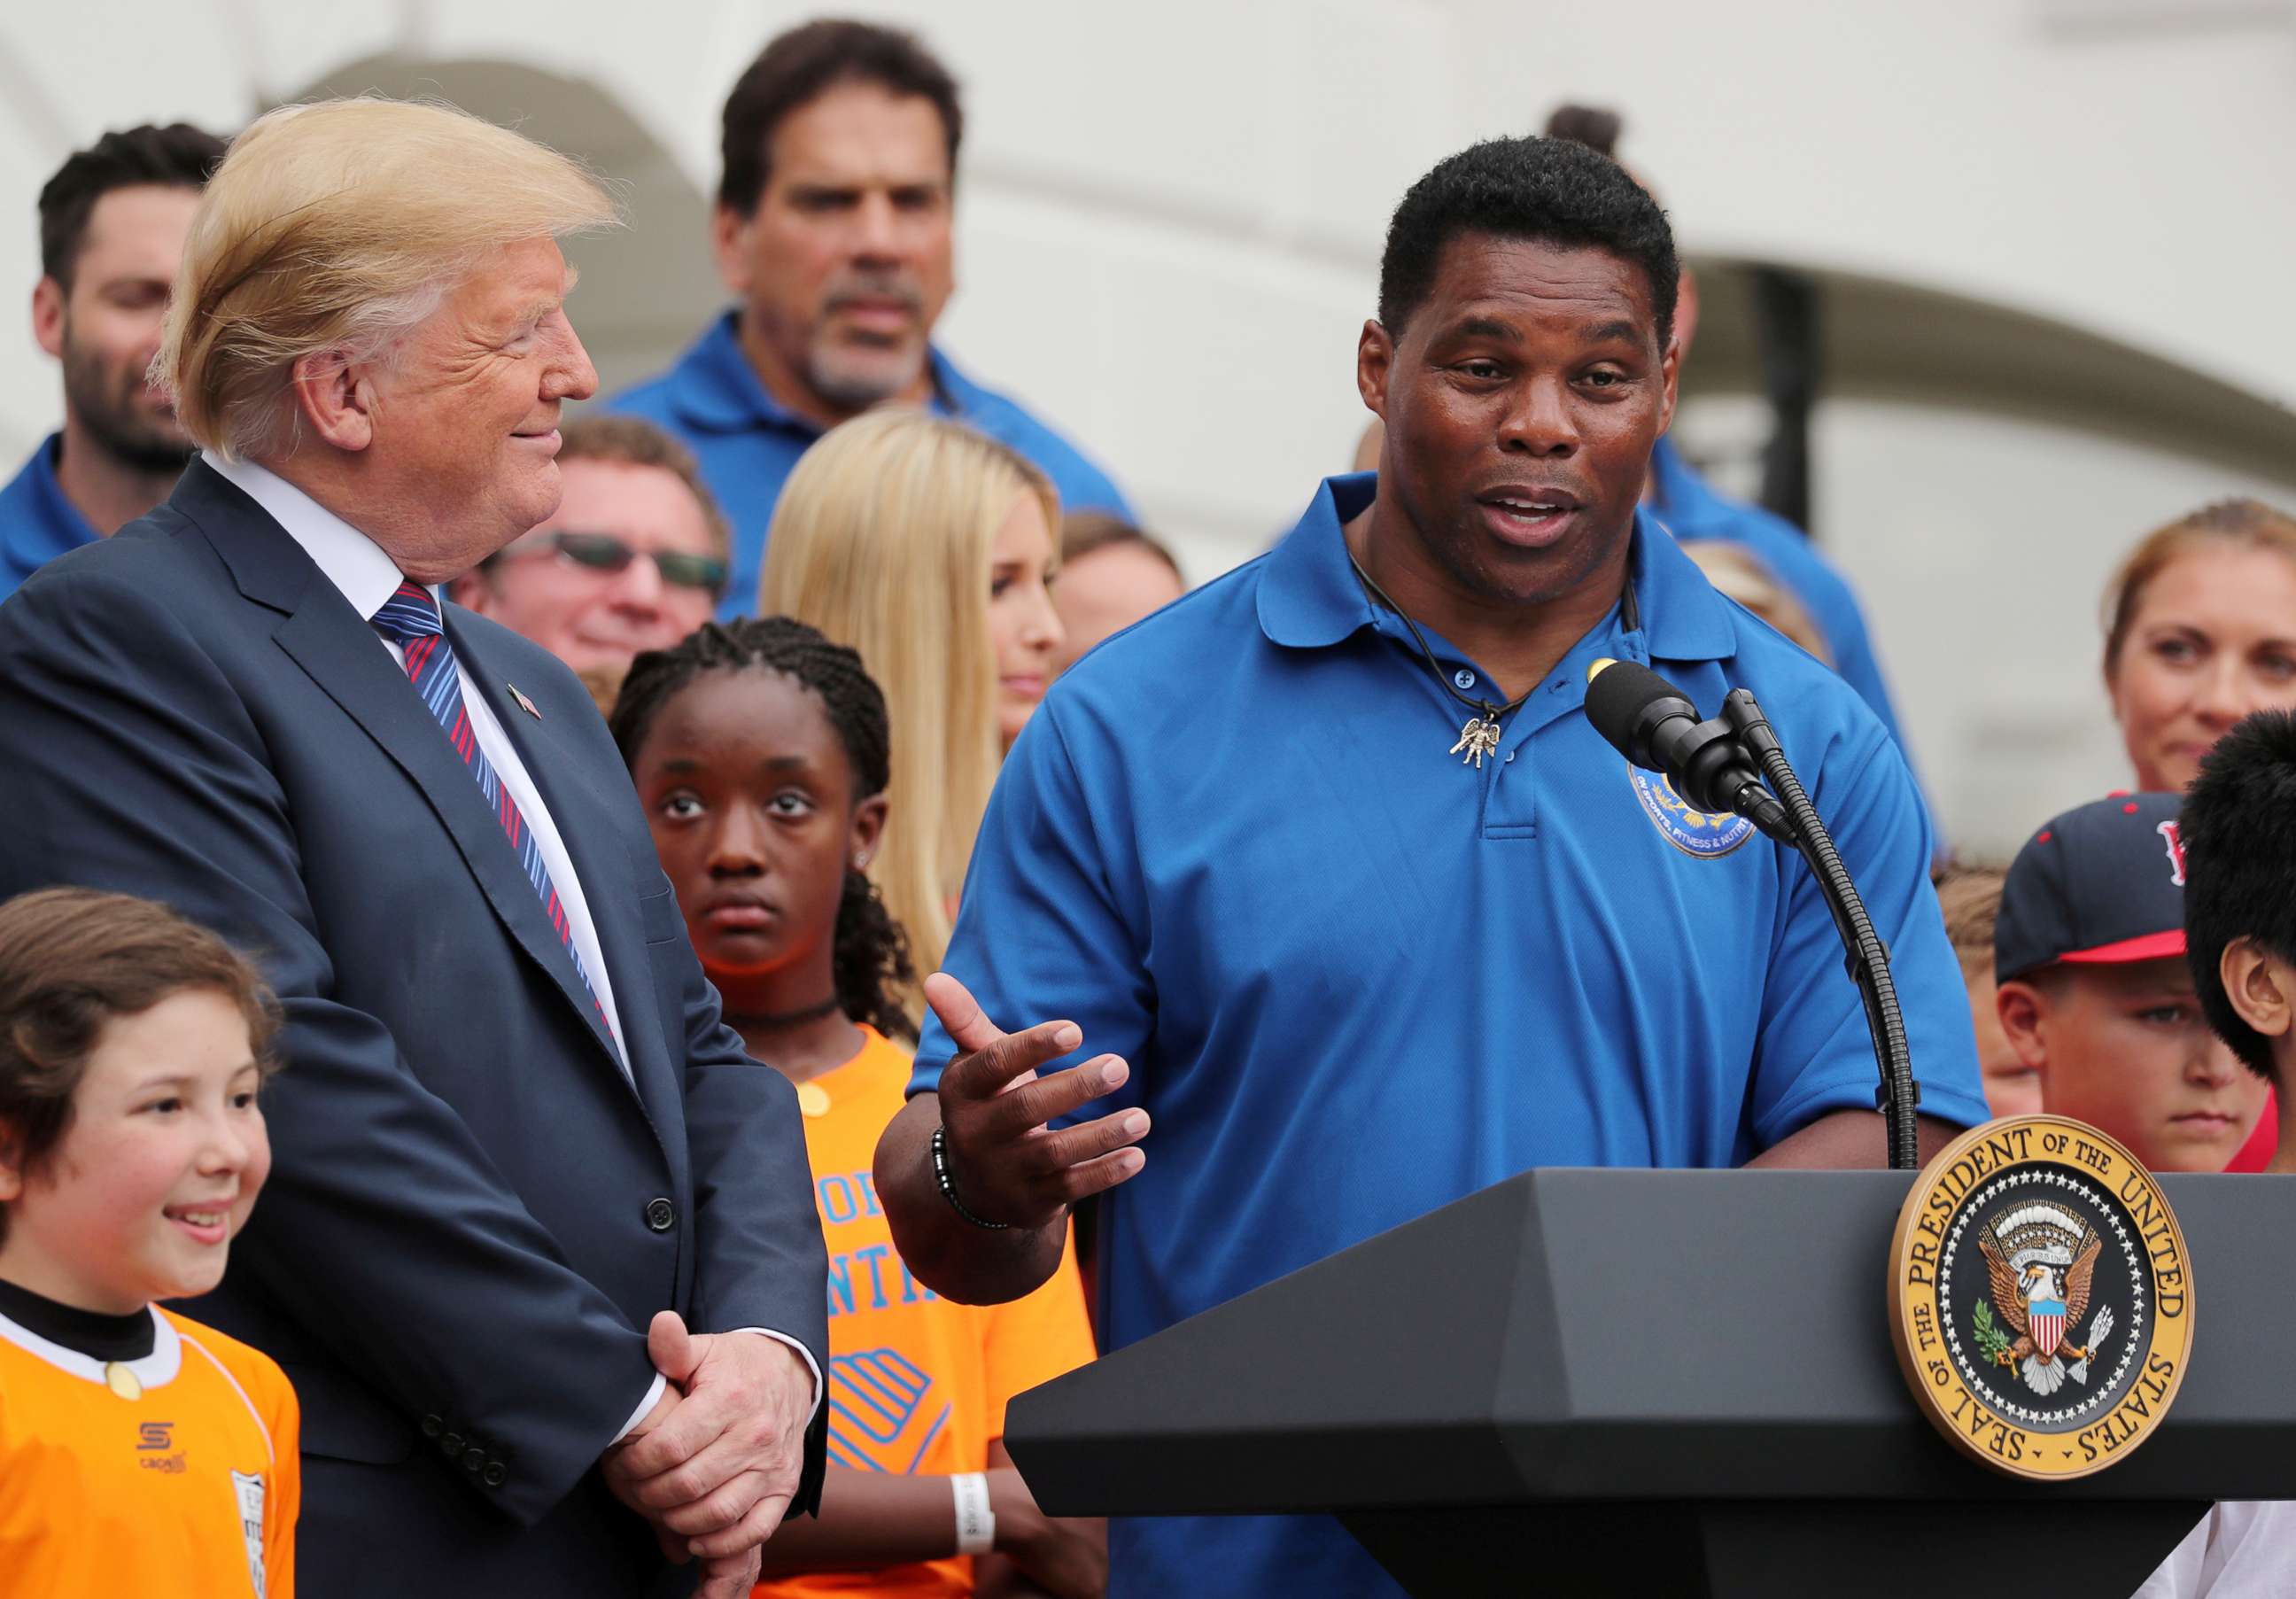 PHOTO: In this May 30, 2018 file photo President Donald Trump listens to former NFL star Herschel Walker speak during the White House Sports and Fitness Day event on the South Lawn of the White House in Washington D.C.